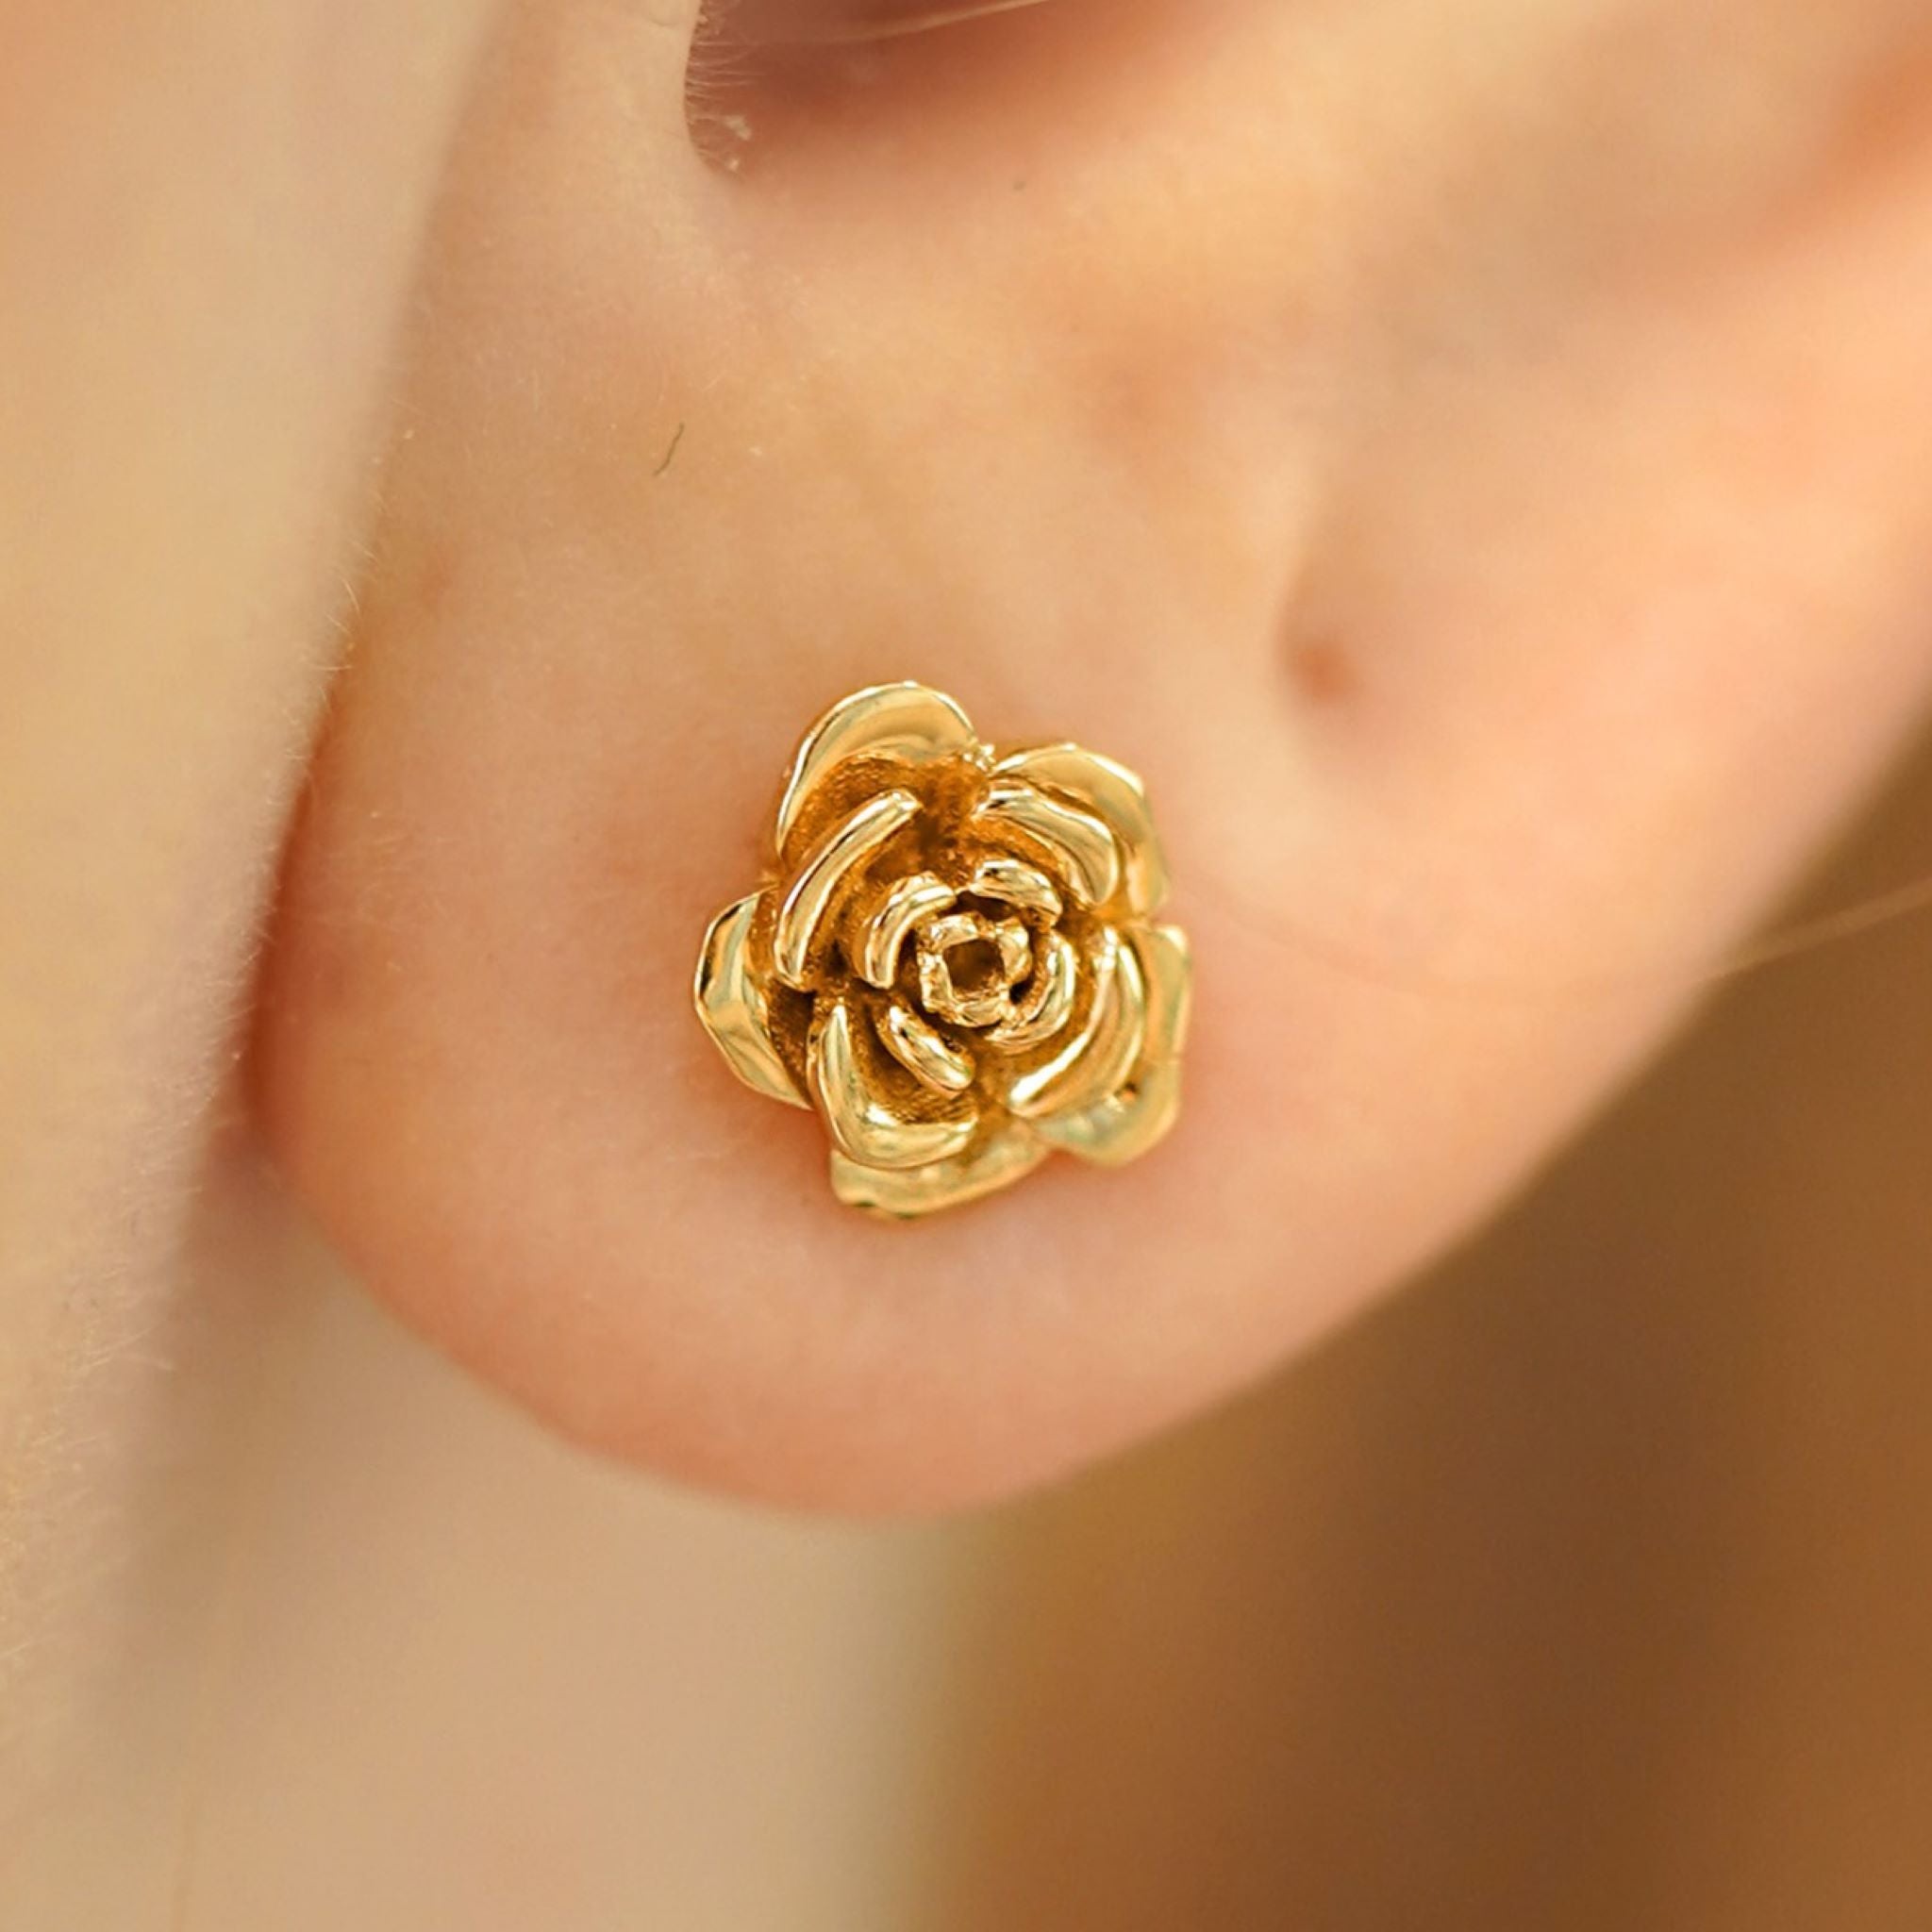 Automic Gold Rose Earring | Minimalist Sustainable Fine Jewelry